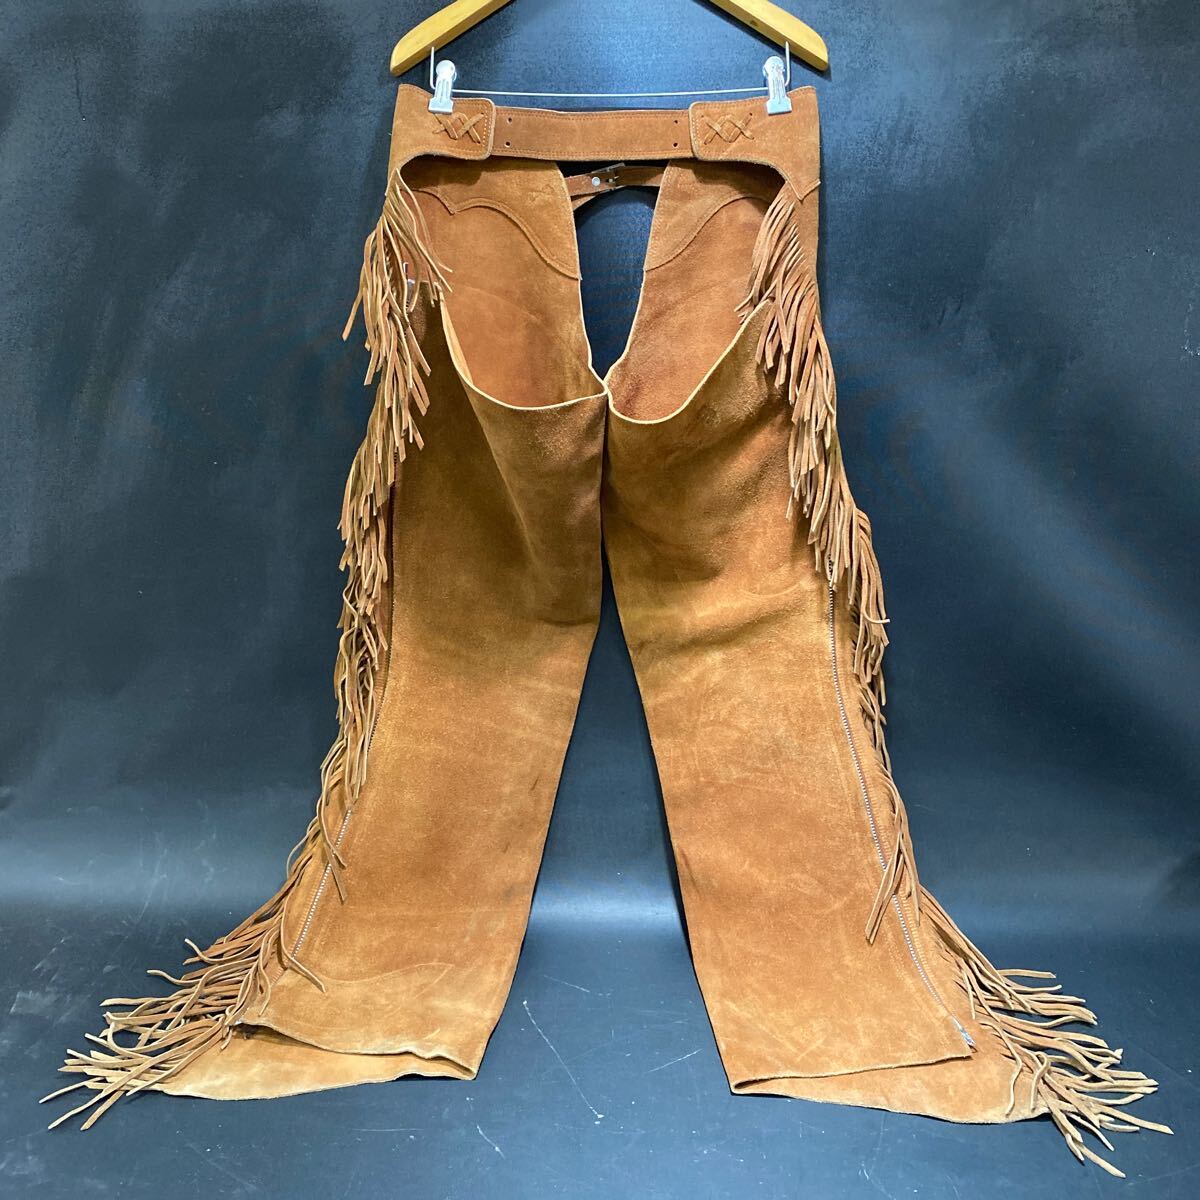 N 3255 [ suede leather chaps length of the legs 88.] original leather kau Boy leather ntsu fringe Western costume play clothes horse riding storage goods 